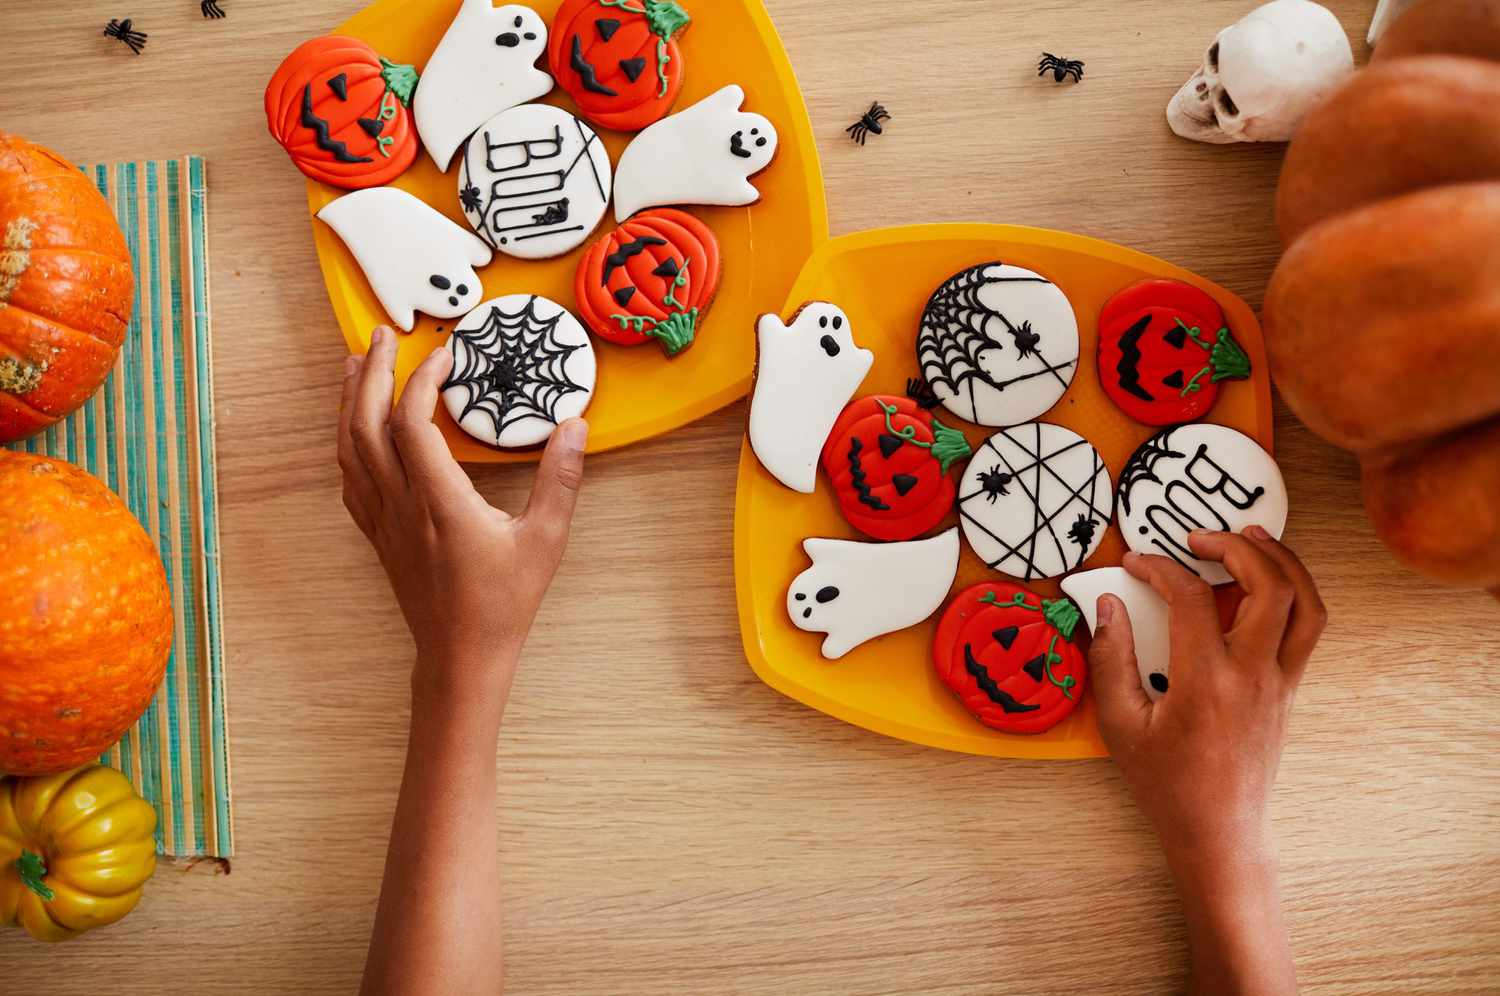 Directly above view of unrecognizable boy adjusting gingerbread cookies on plates while preparing sweets for Halloween party